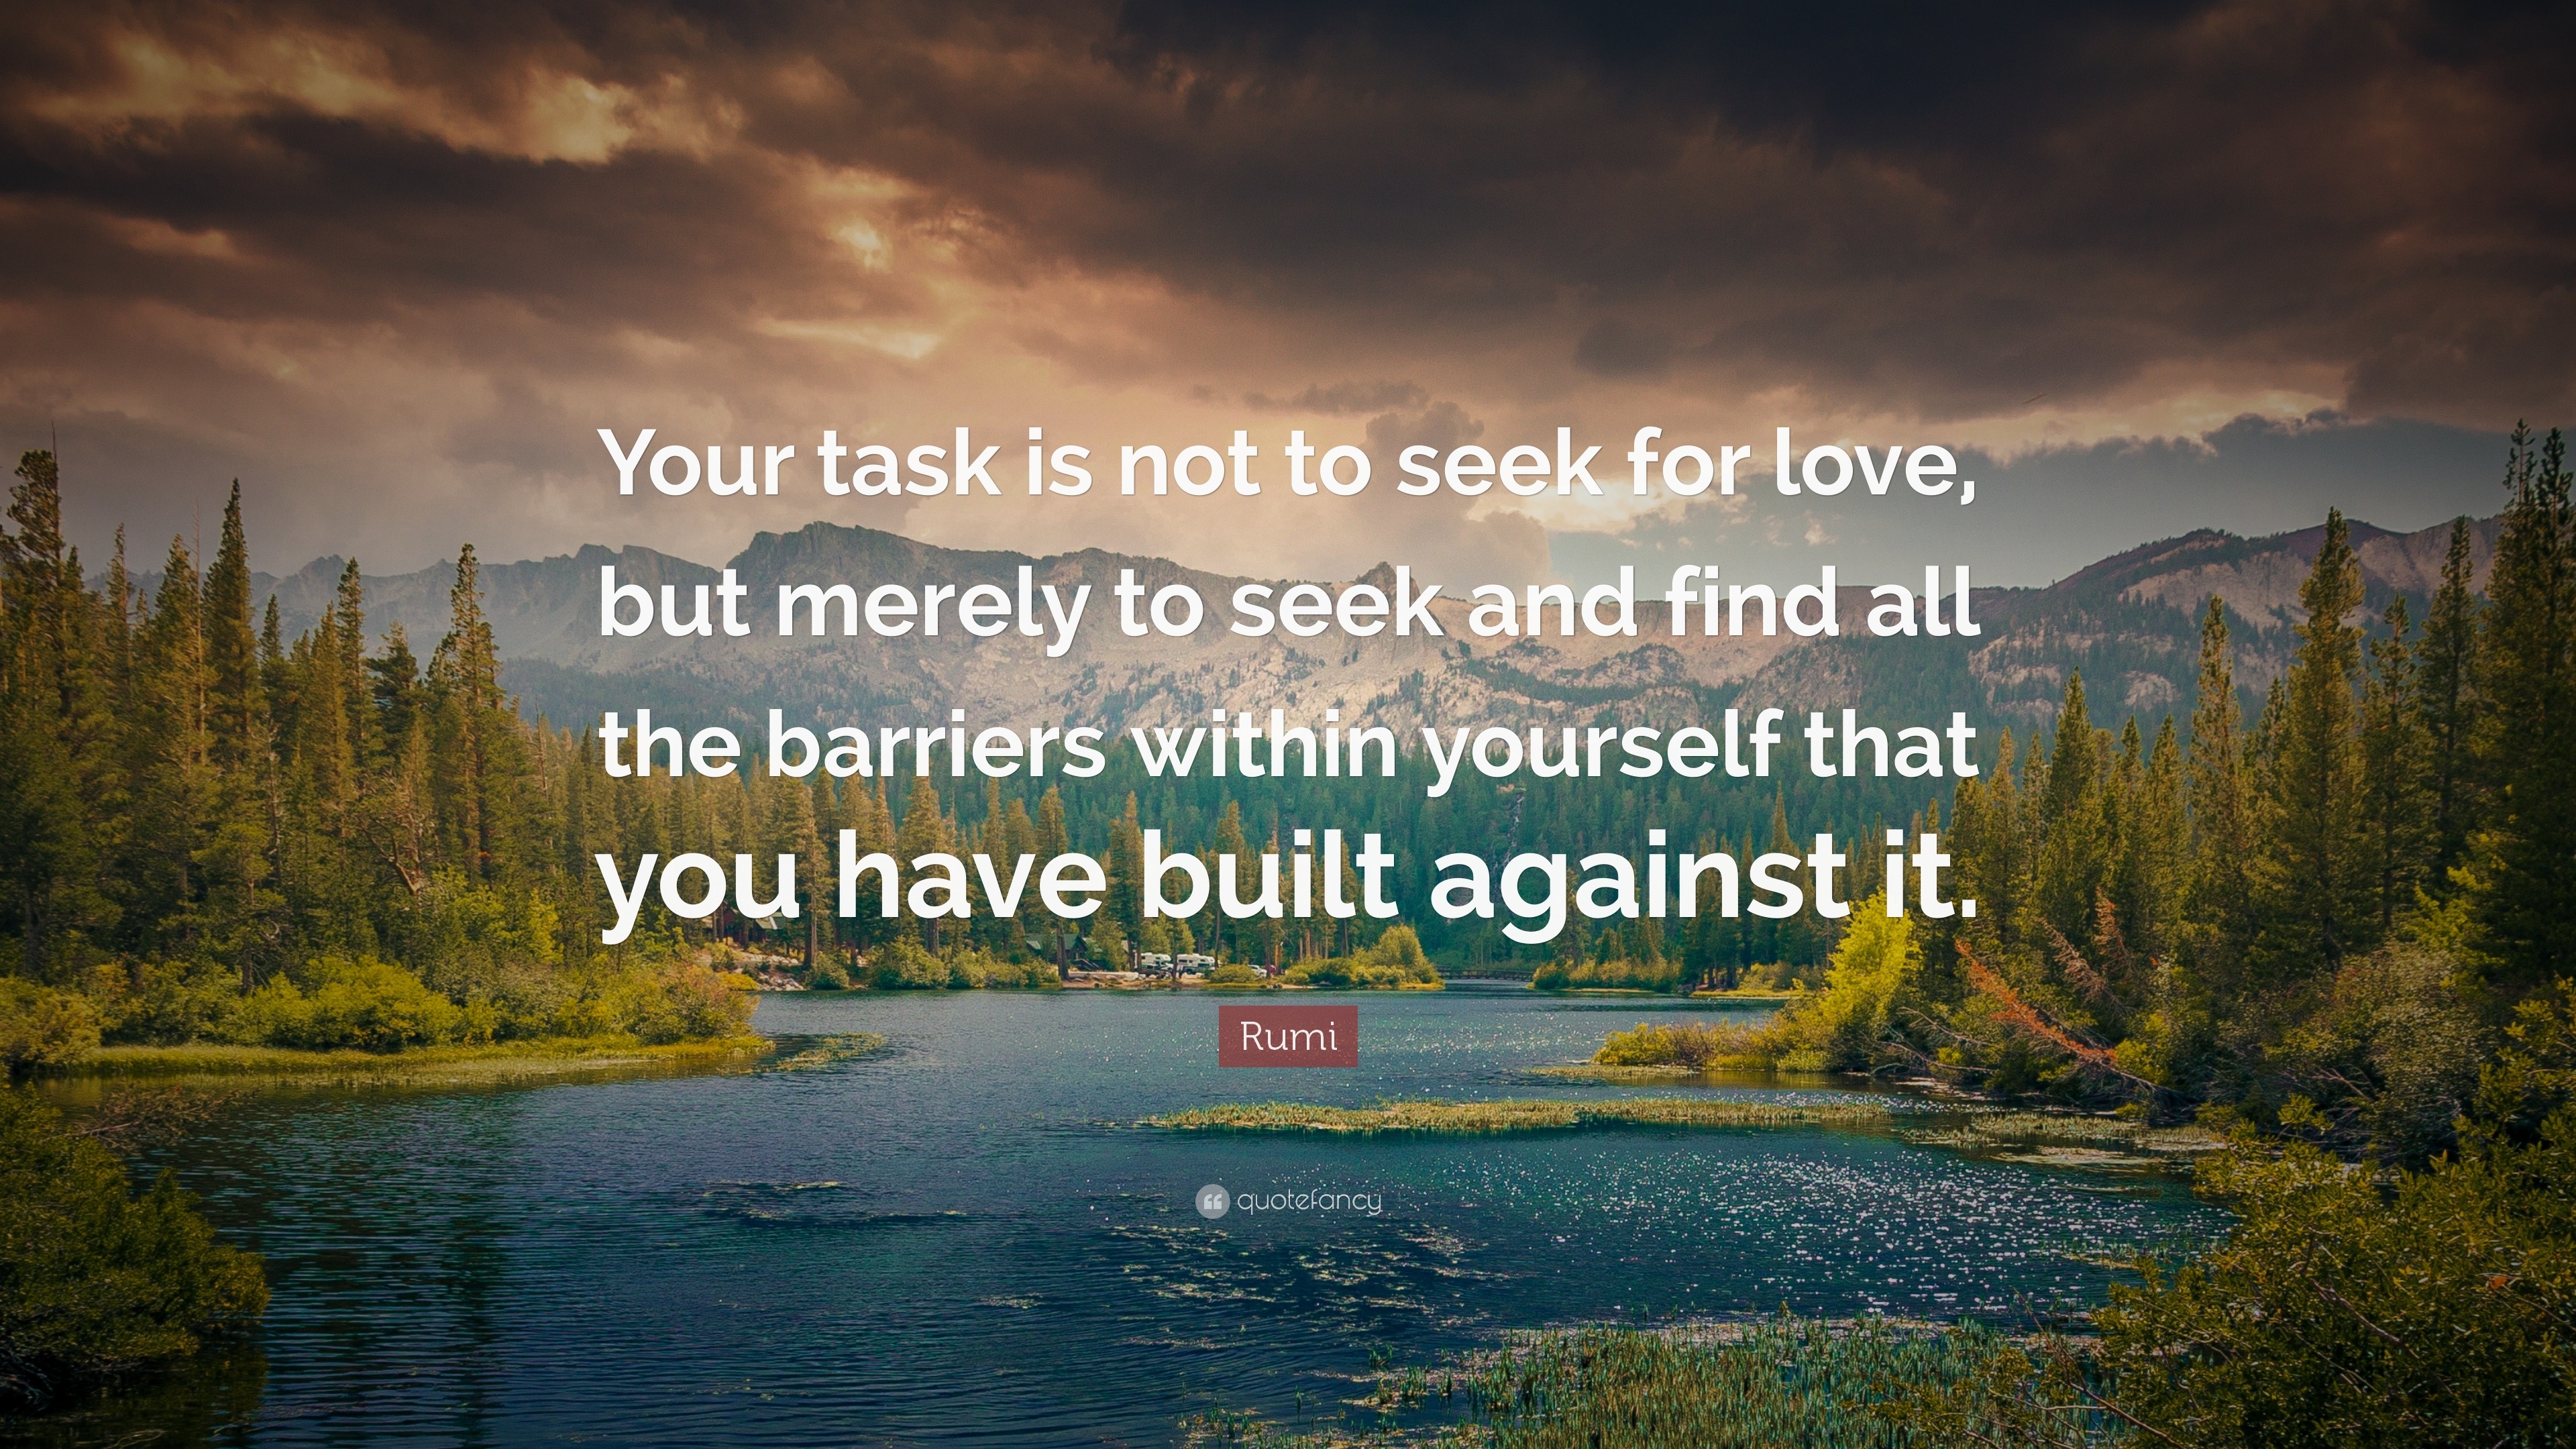 Rumi Quote “Your task is not to seek for love but merely to